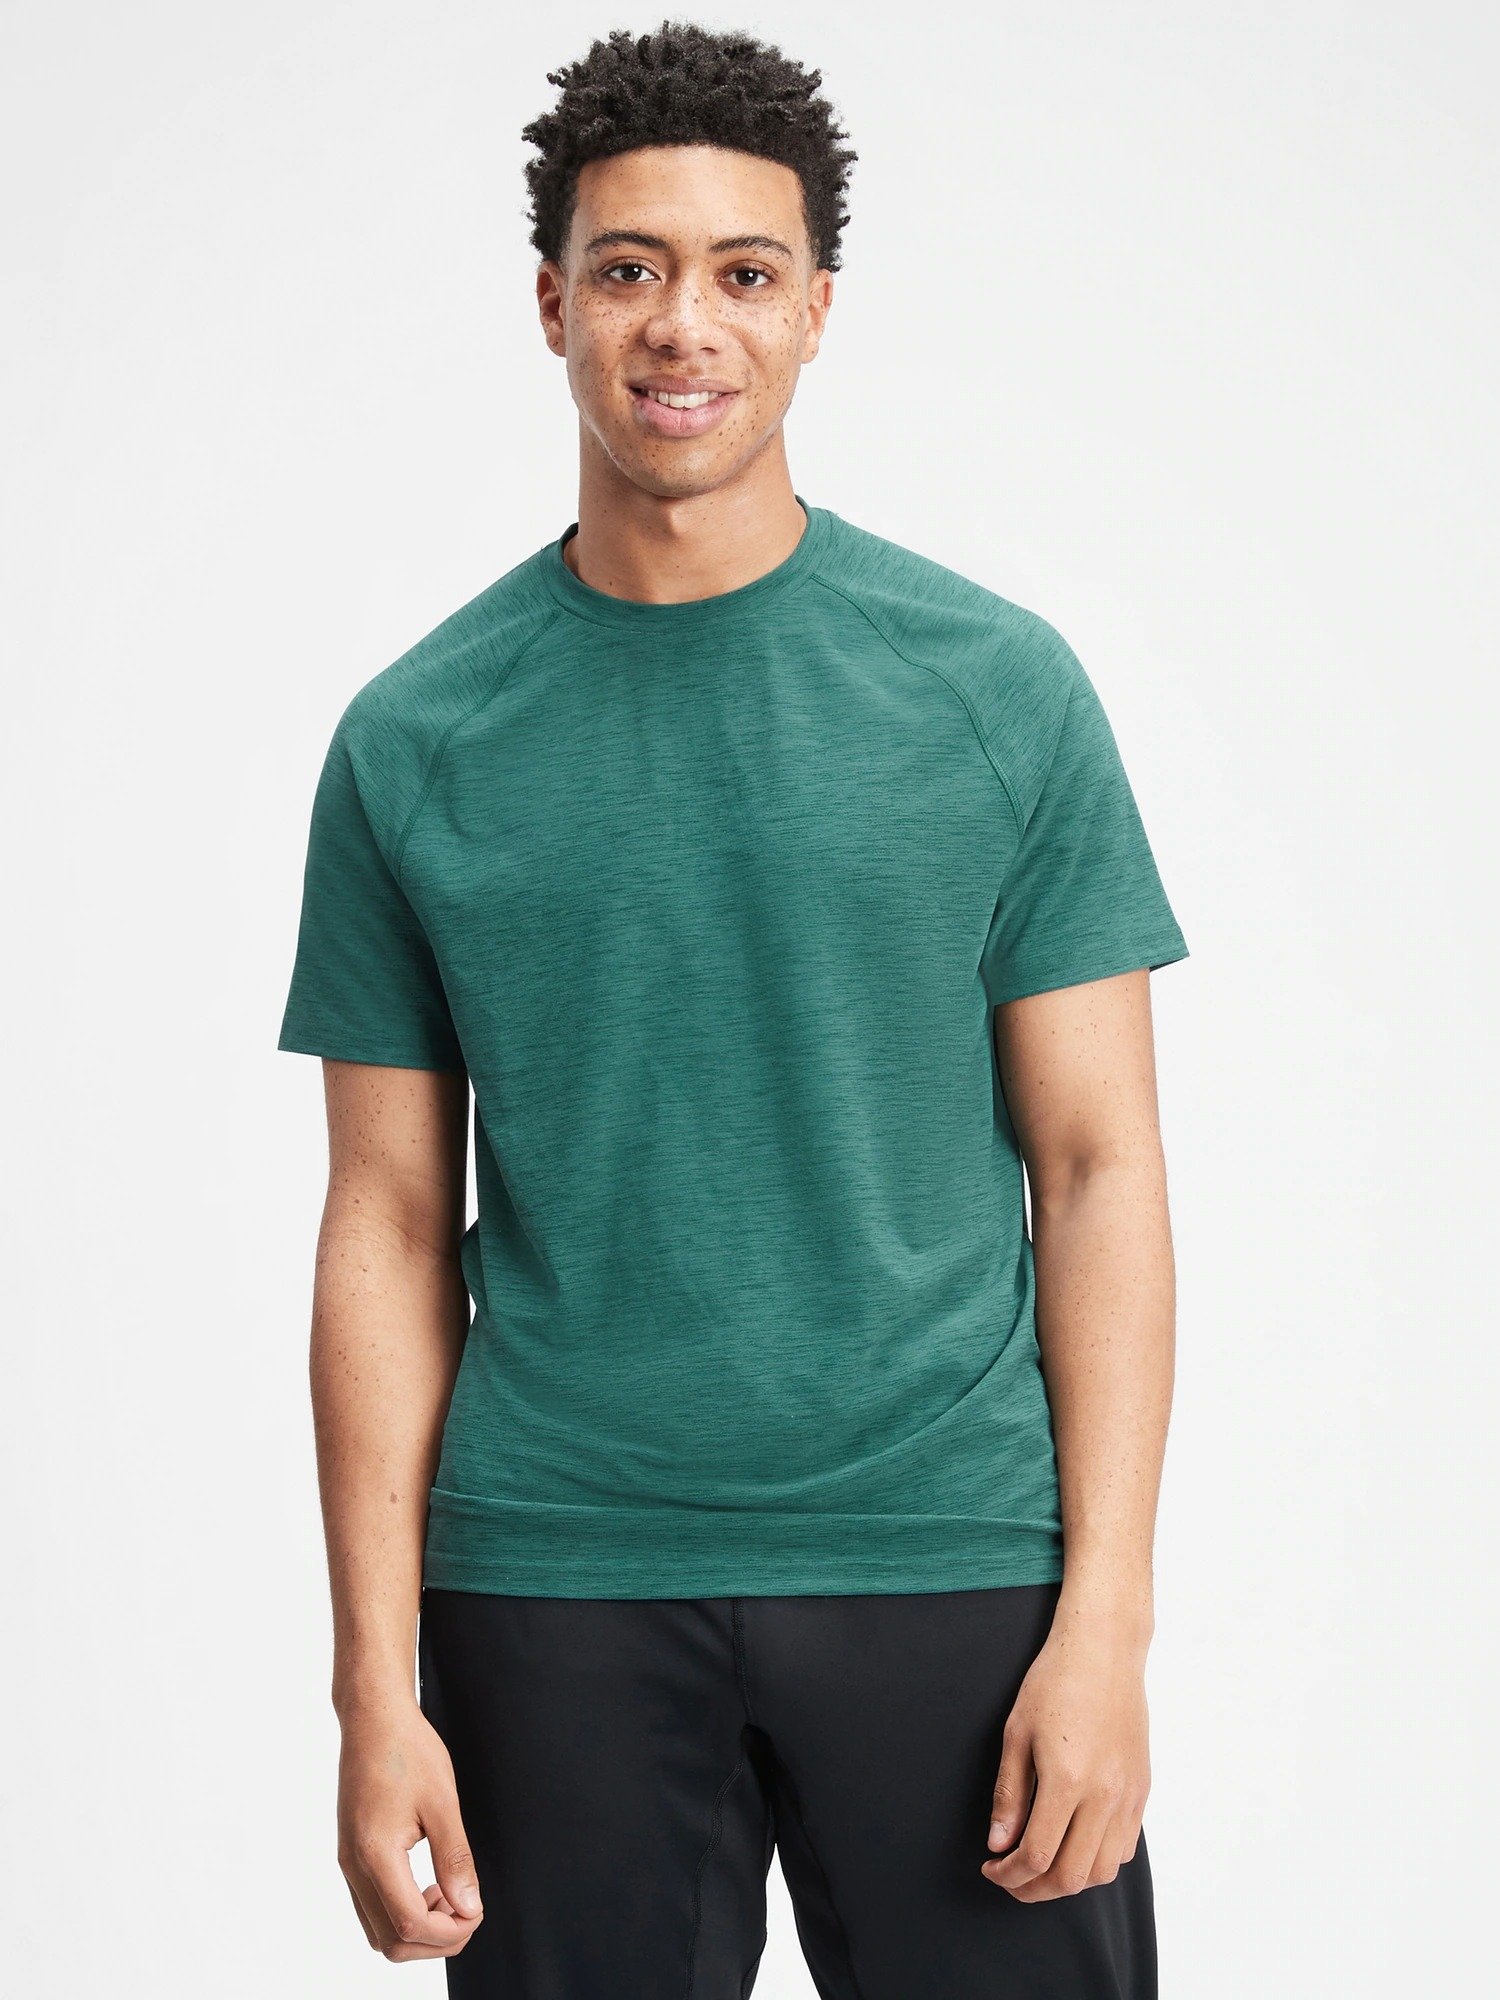 GapFit All Day T-Shirt product image